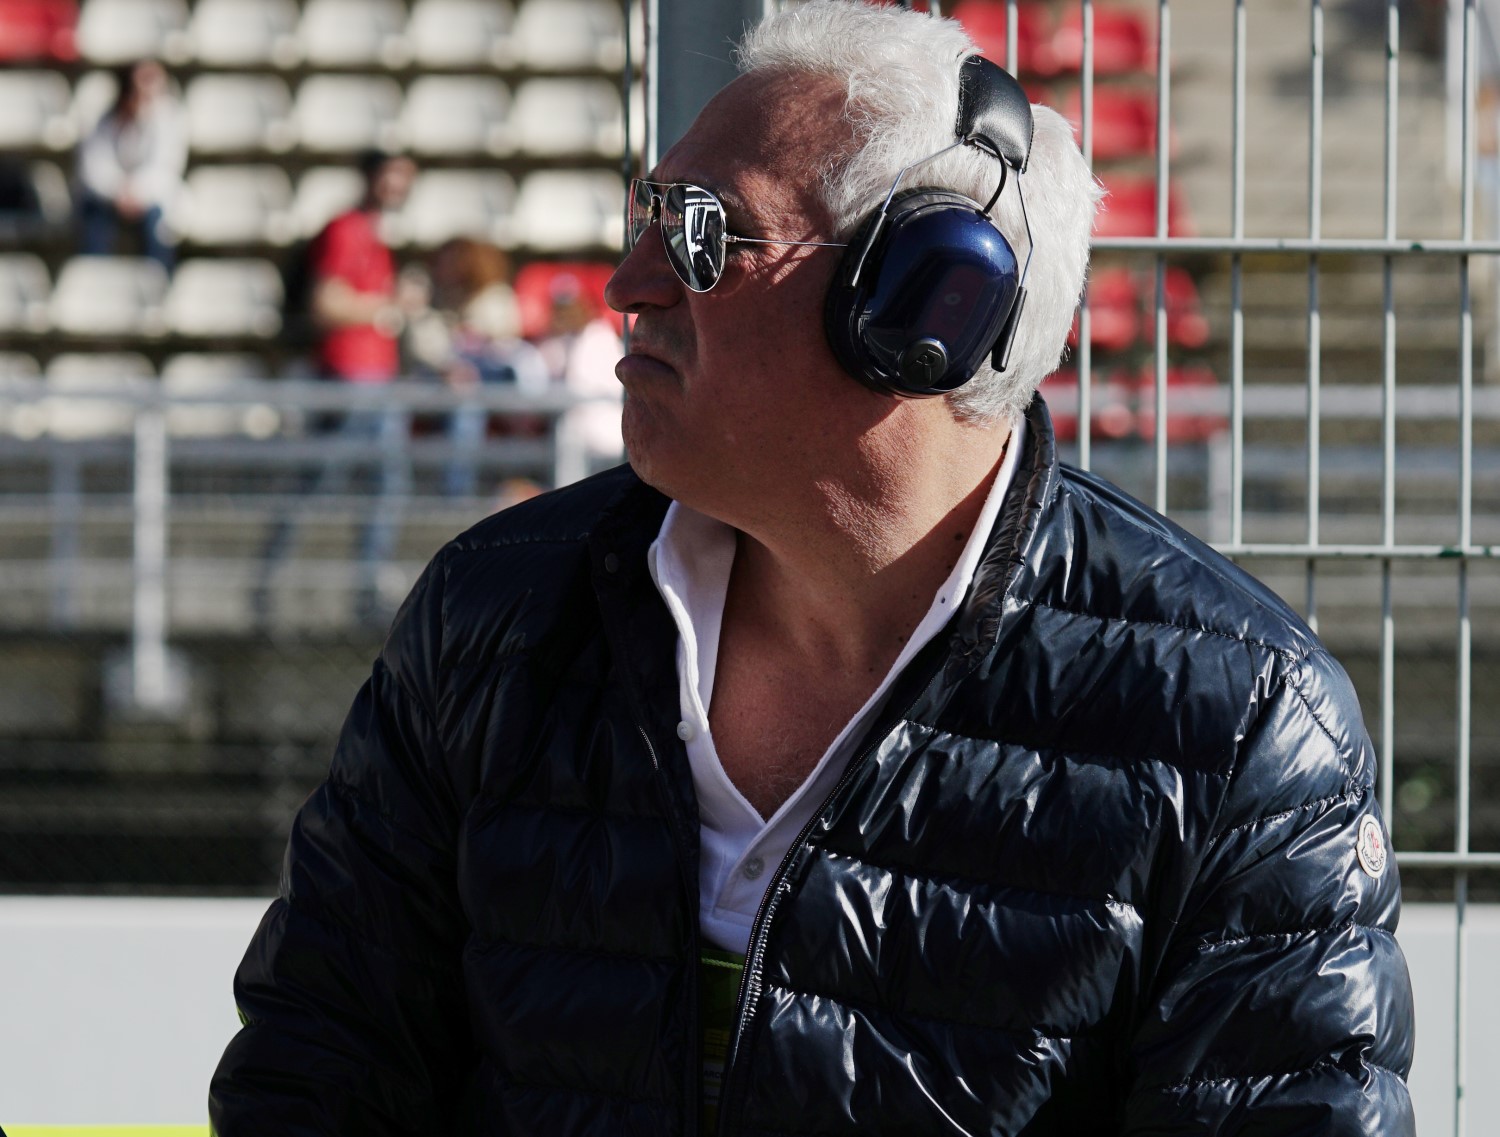 Lawrence Stroll bought an entire F1 team for his son